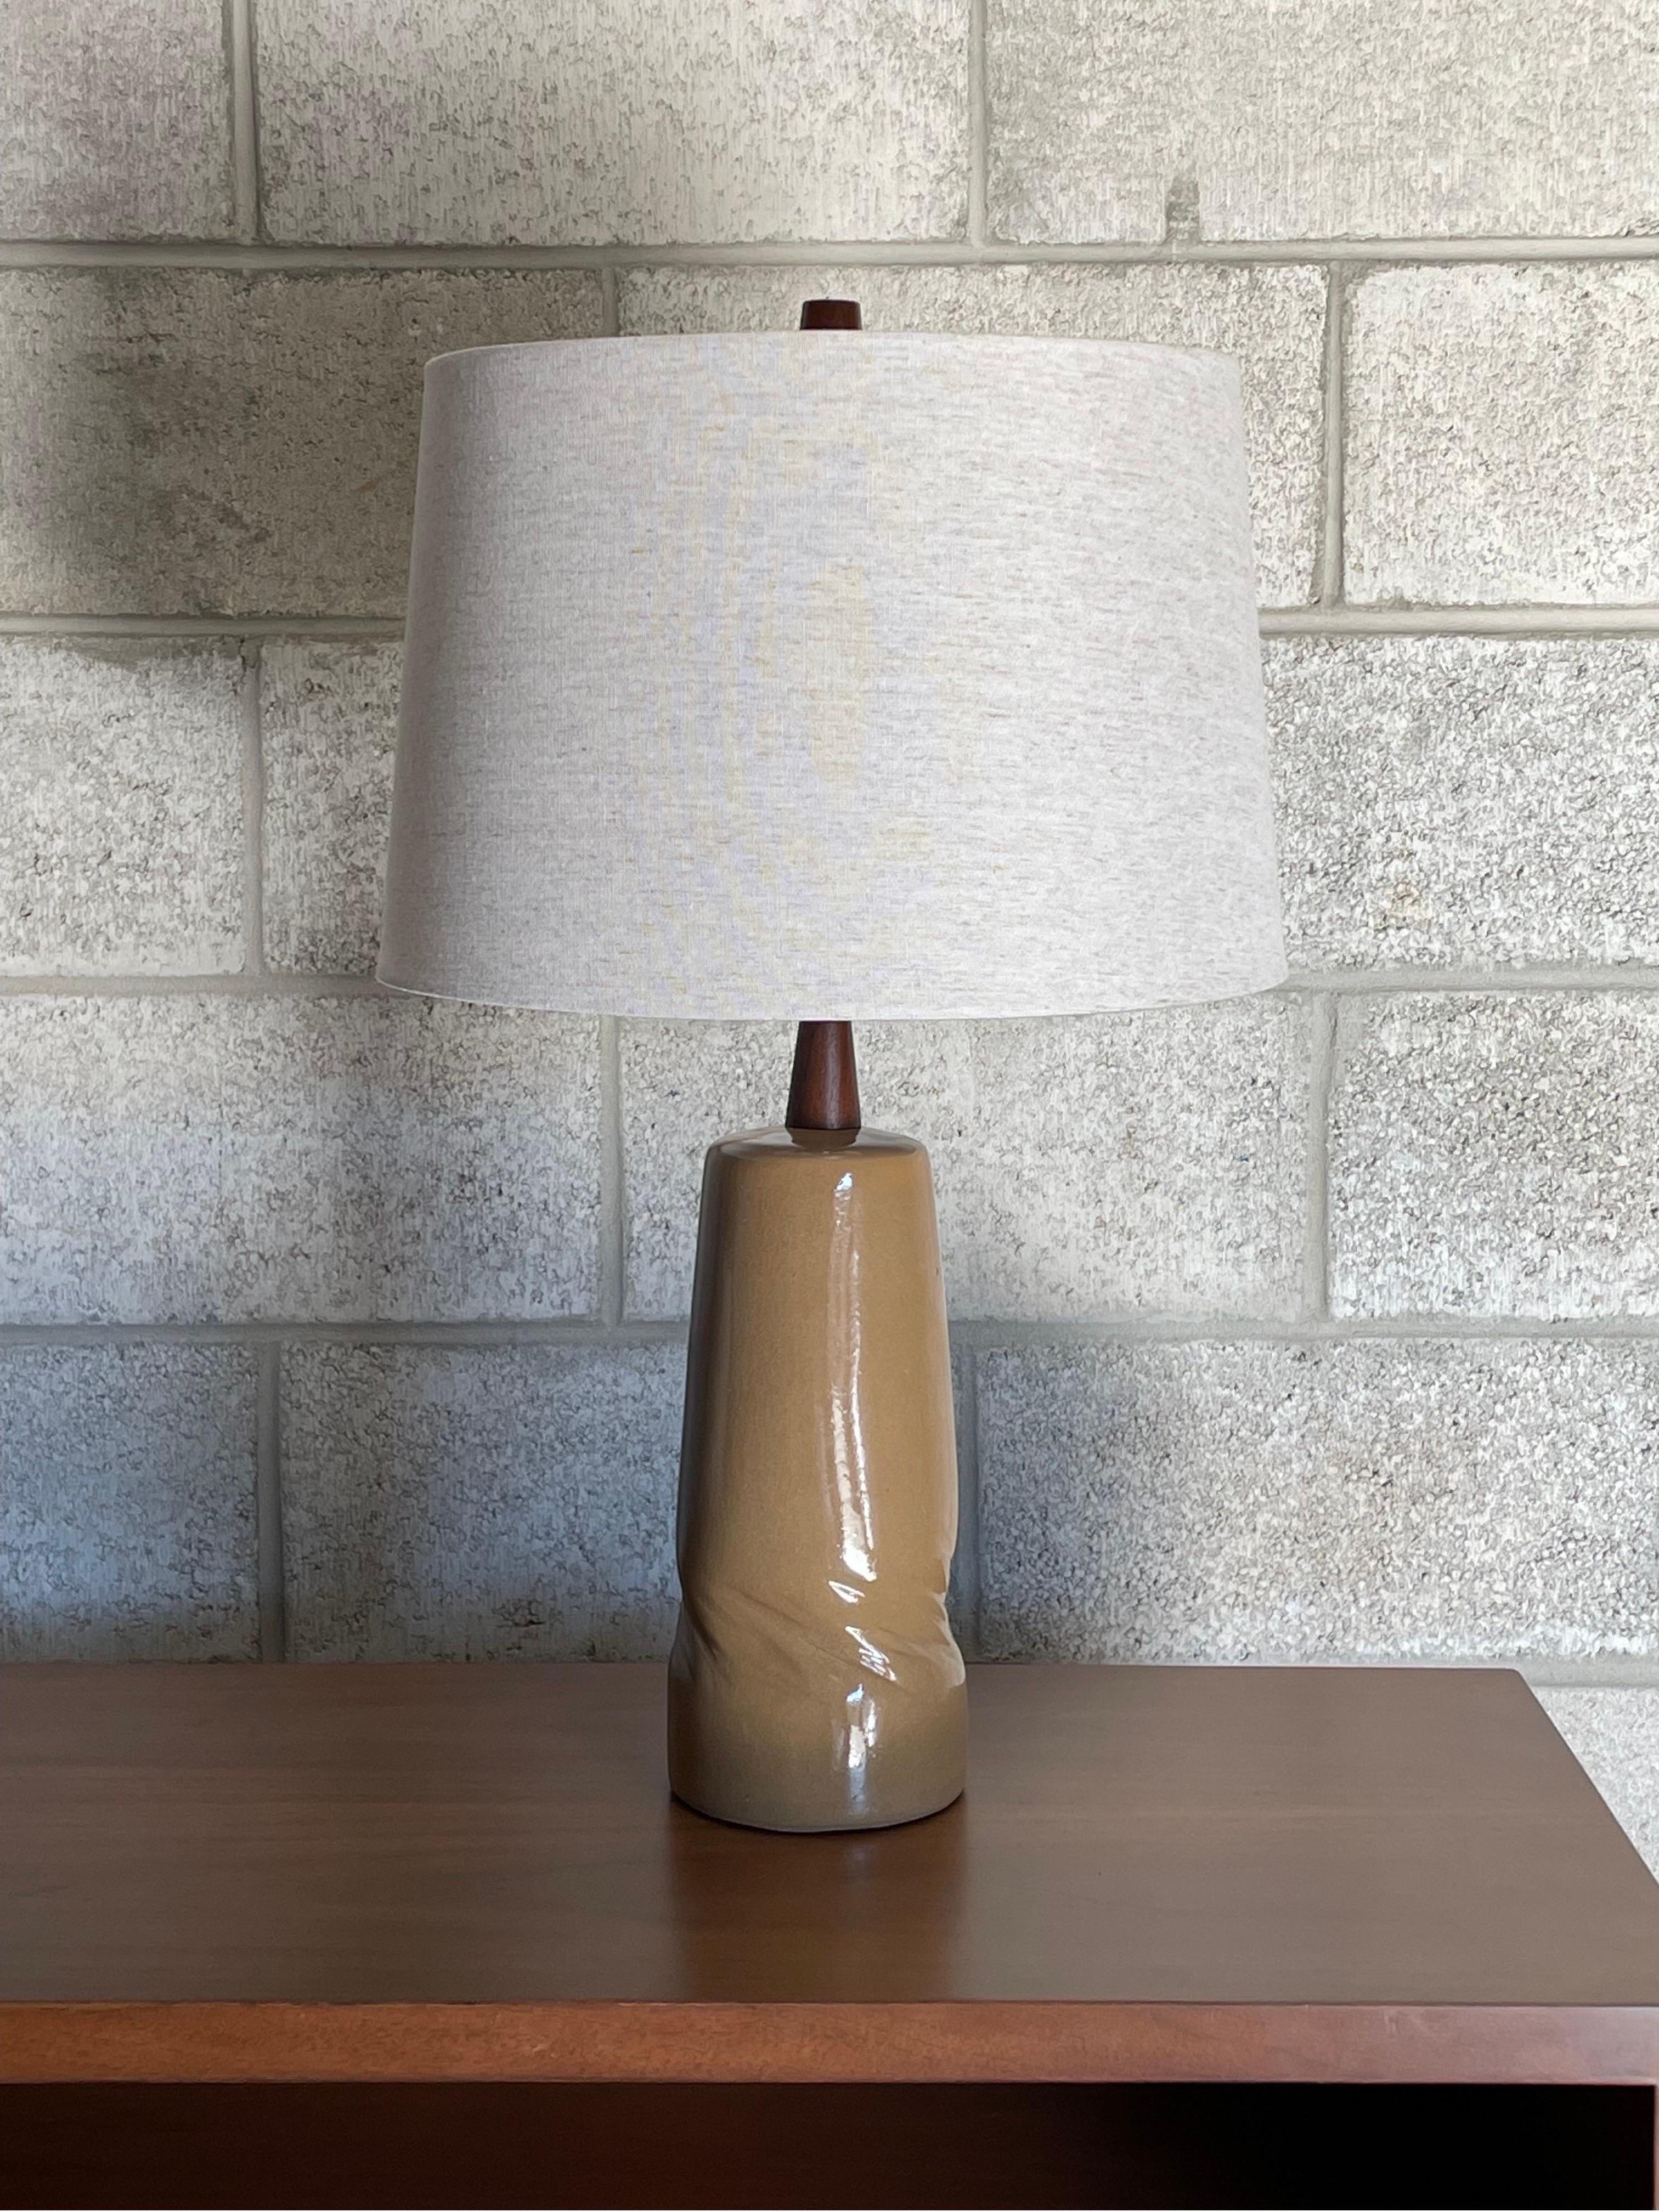 Table lamp by ceramicist duo Jane and Gordon Martz for Marshall Studios. Unusual ochre like color with interesting and unusual twisted detail. Unique design adds great movement and depth to the lamp. 

Measures: 
Overall 
24.5” tall 
15” wide